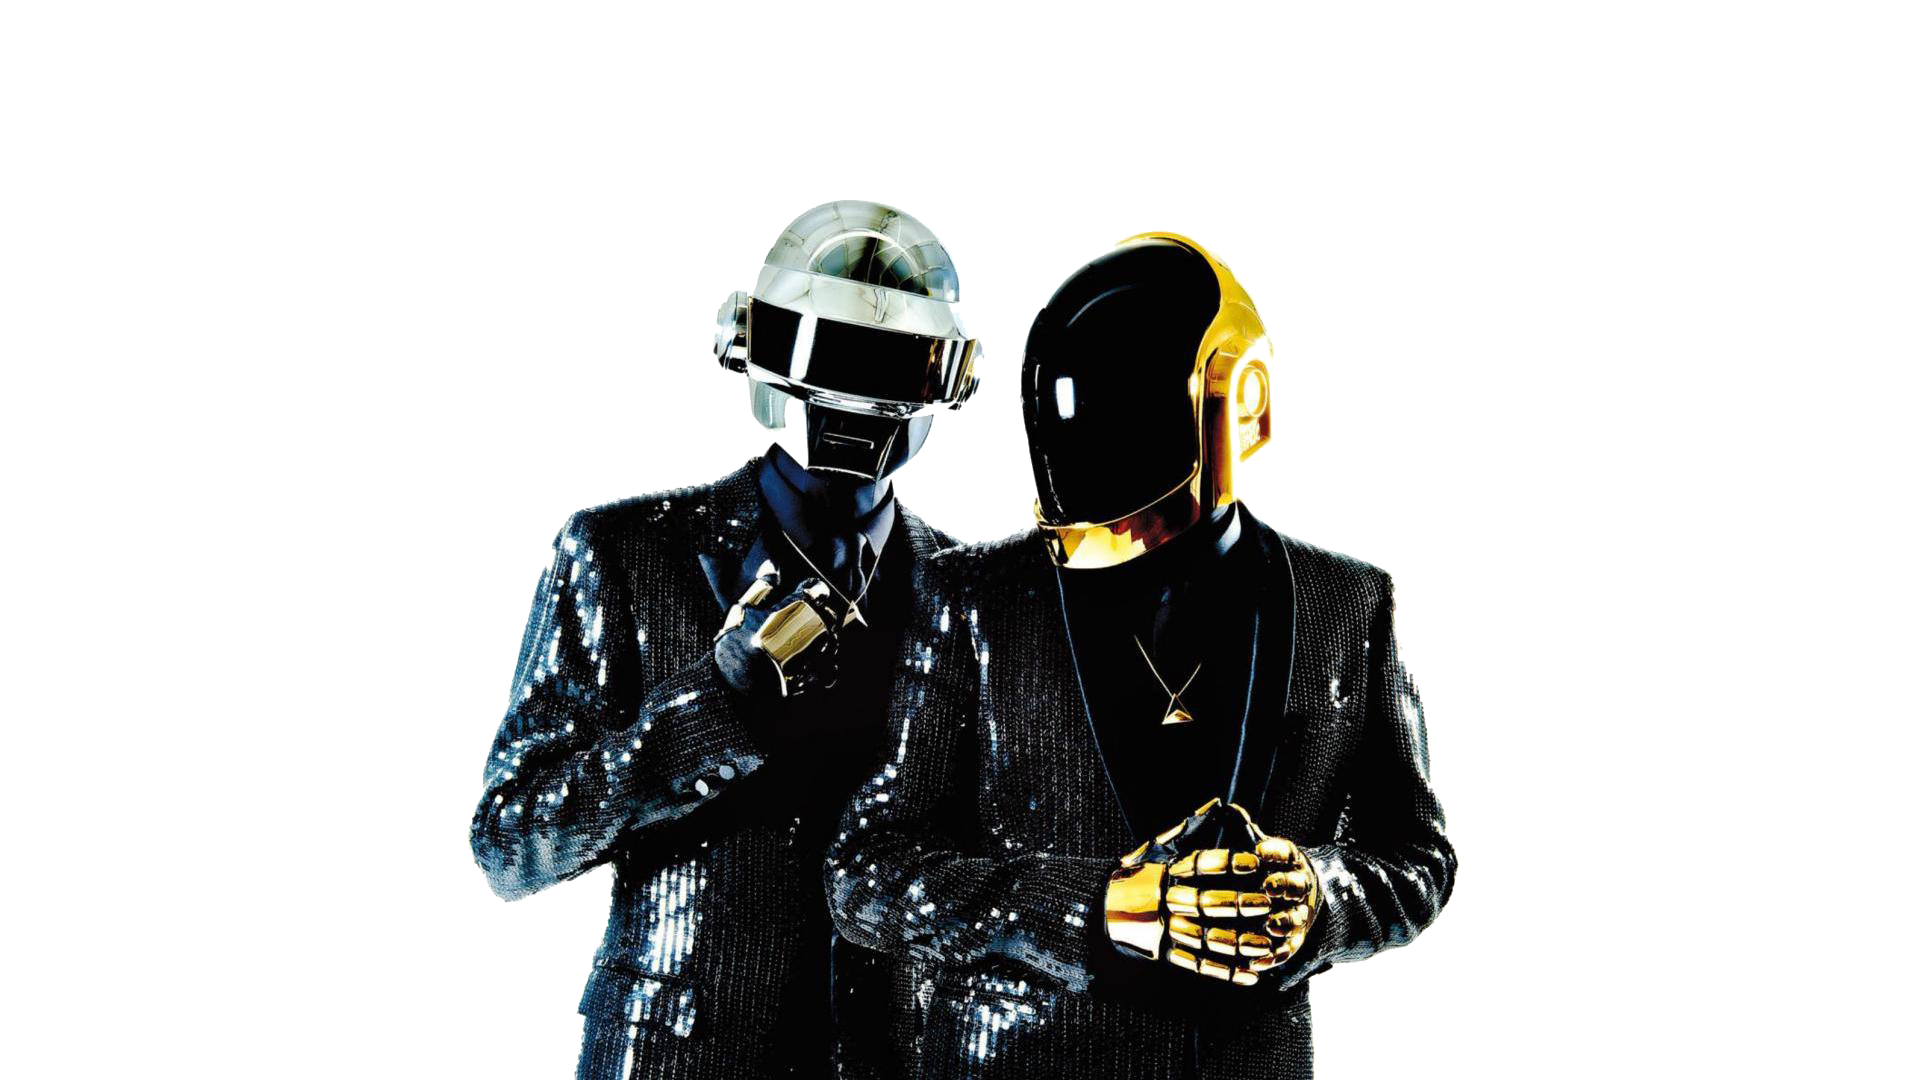 Daft Punk PNG Image with Transparent Background